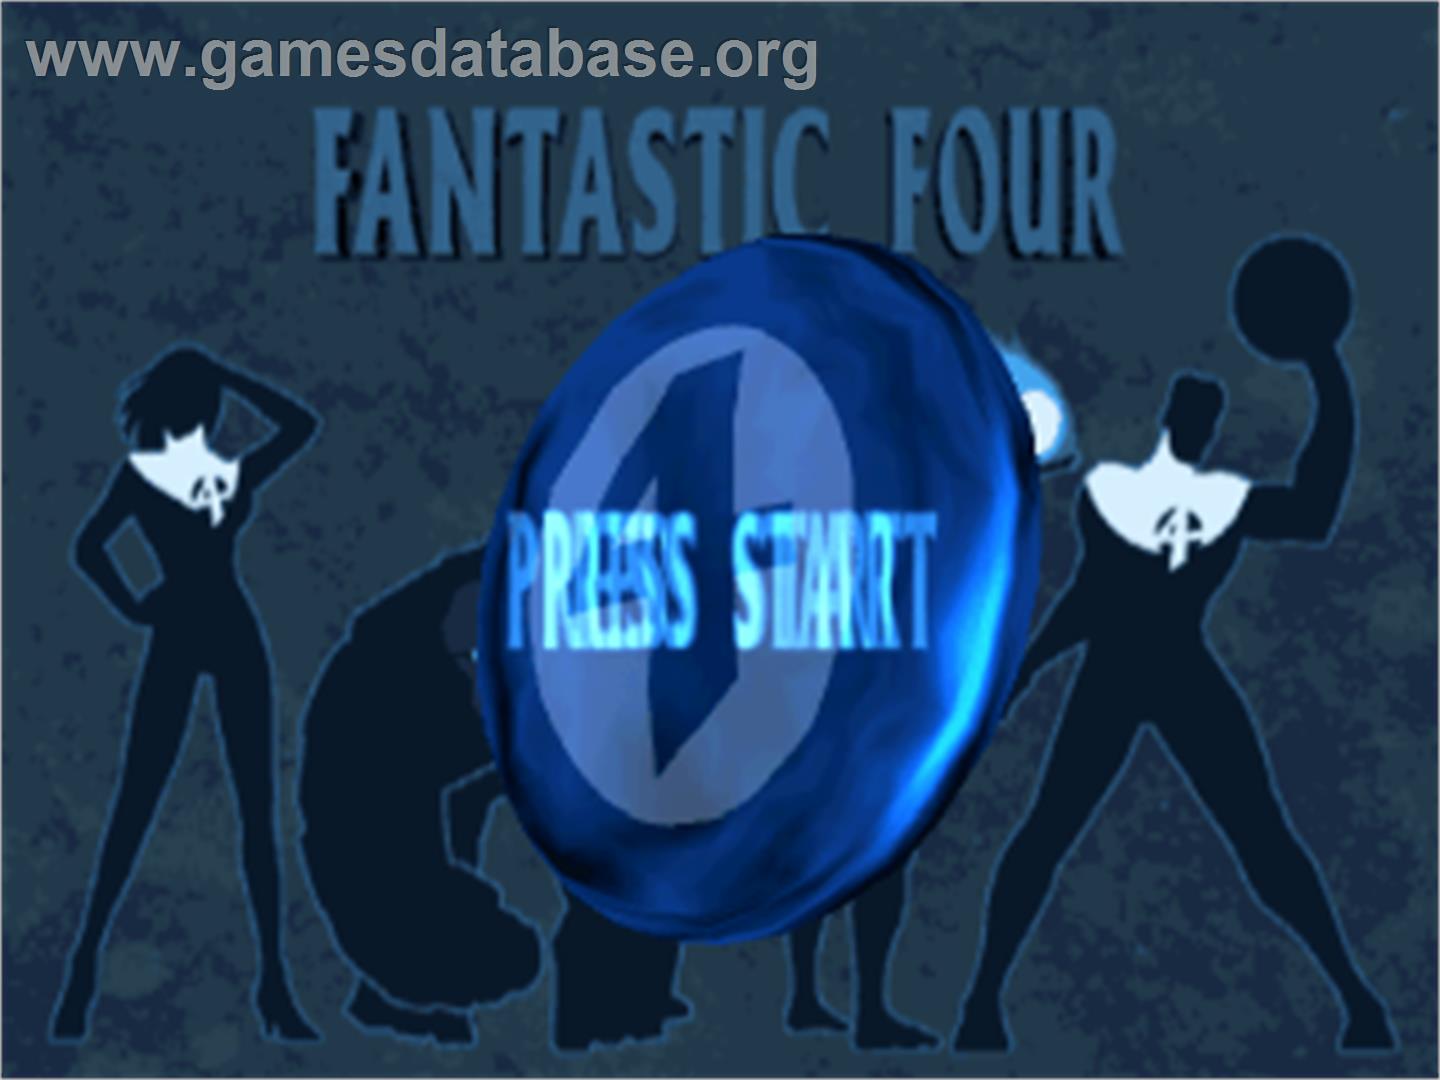 The Fantastic Four - Sony Playstation - Artwork - Title Screen